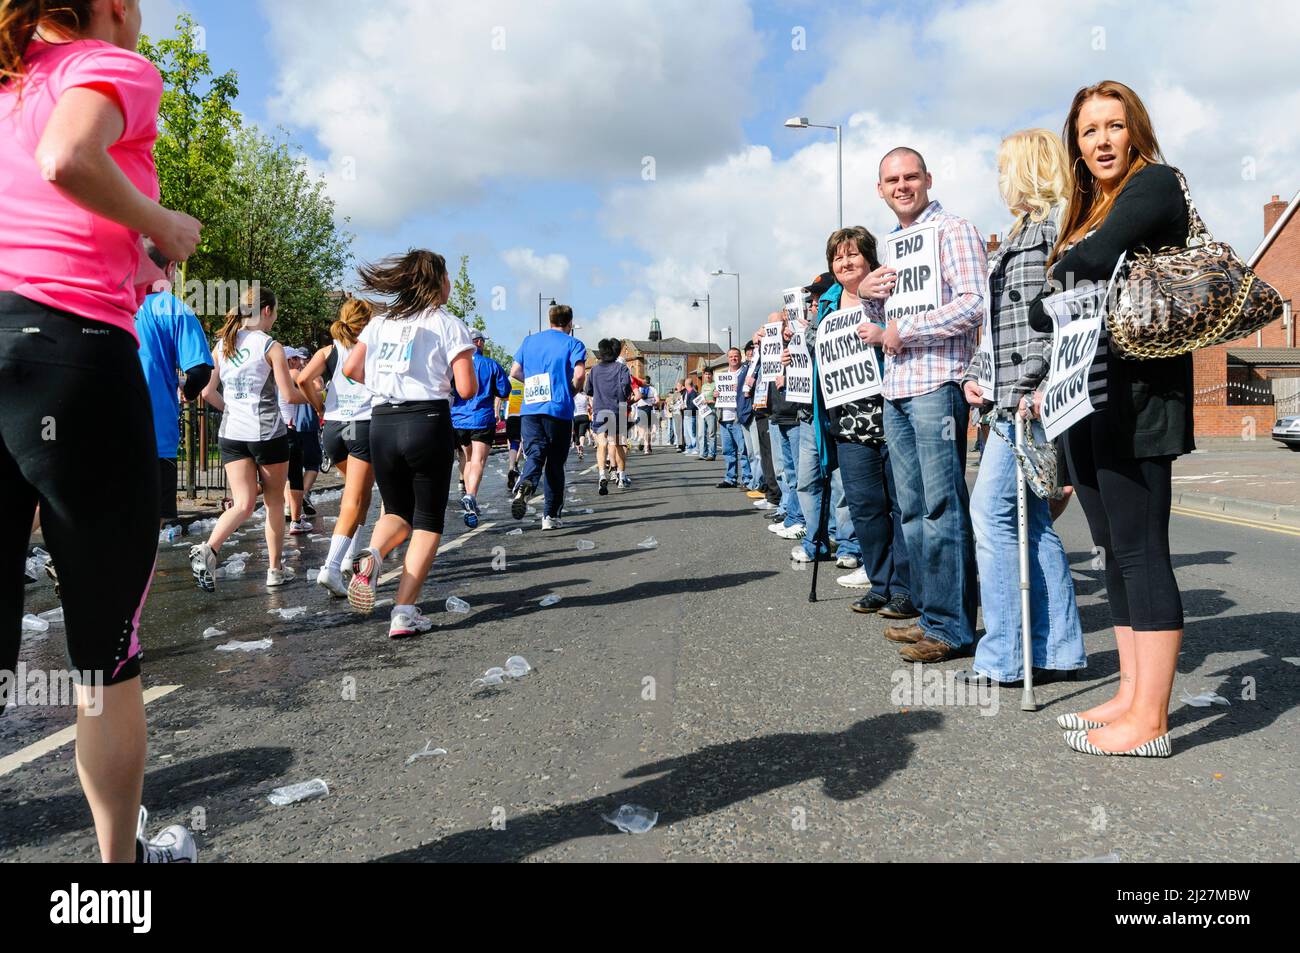 03/05/2010, Belfast, Northern Ireland.  Republicans hold a "White Line Protest" in the middle of the Falls Road during the annual Belfast Marathon, calling for the end of prison brutality at HMP Maghaberry. Stock Photo